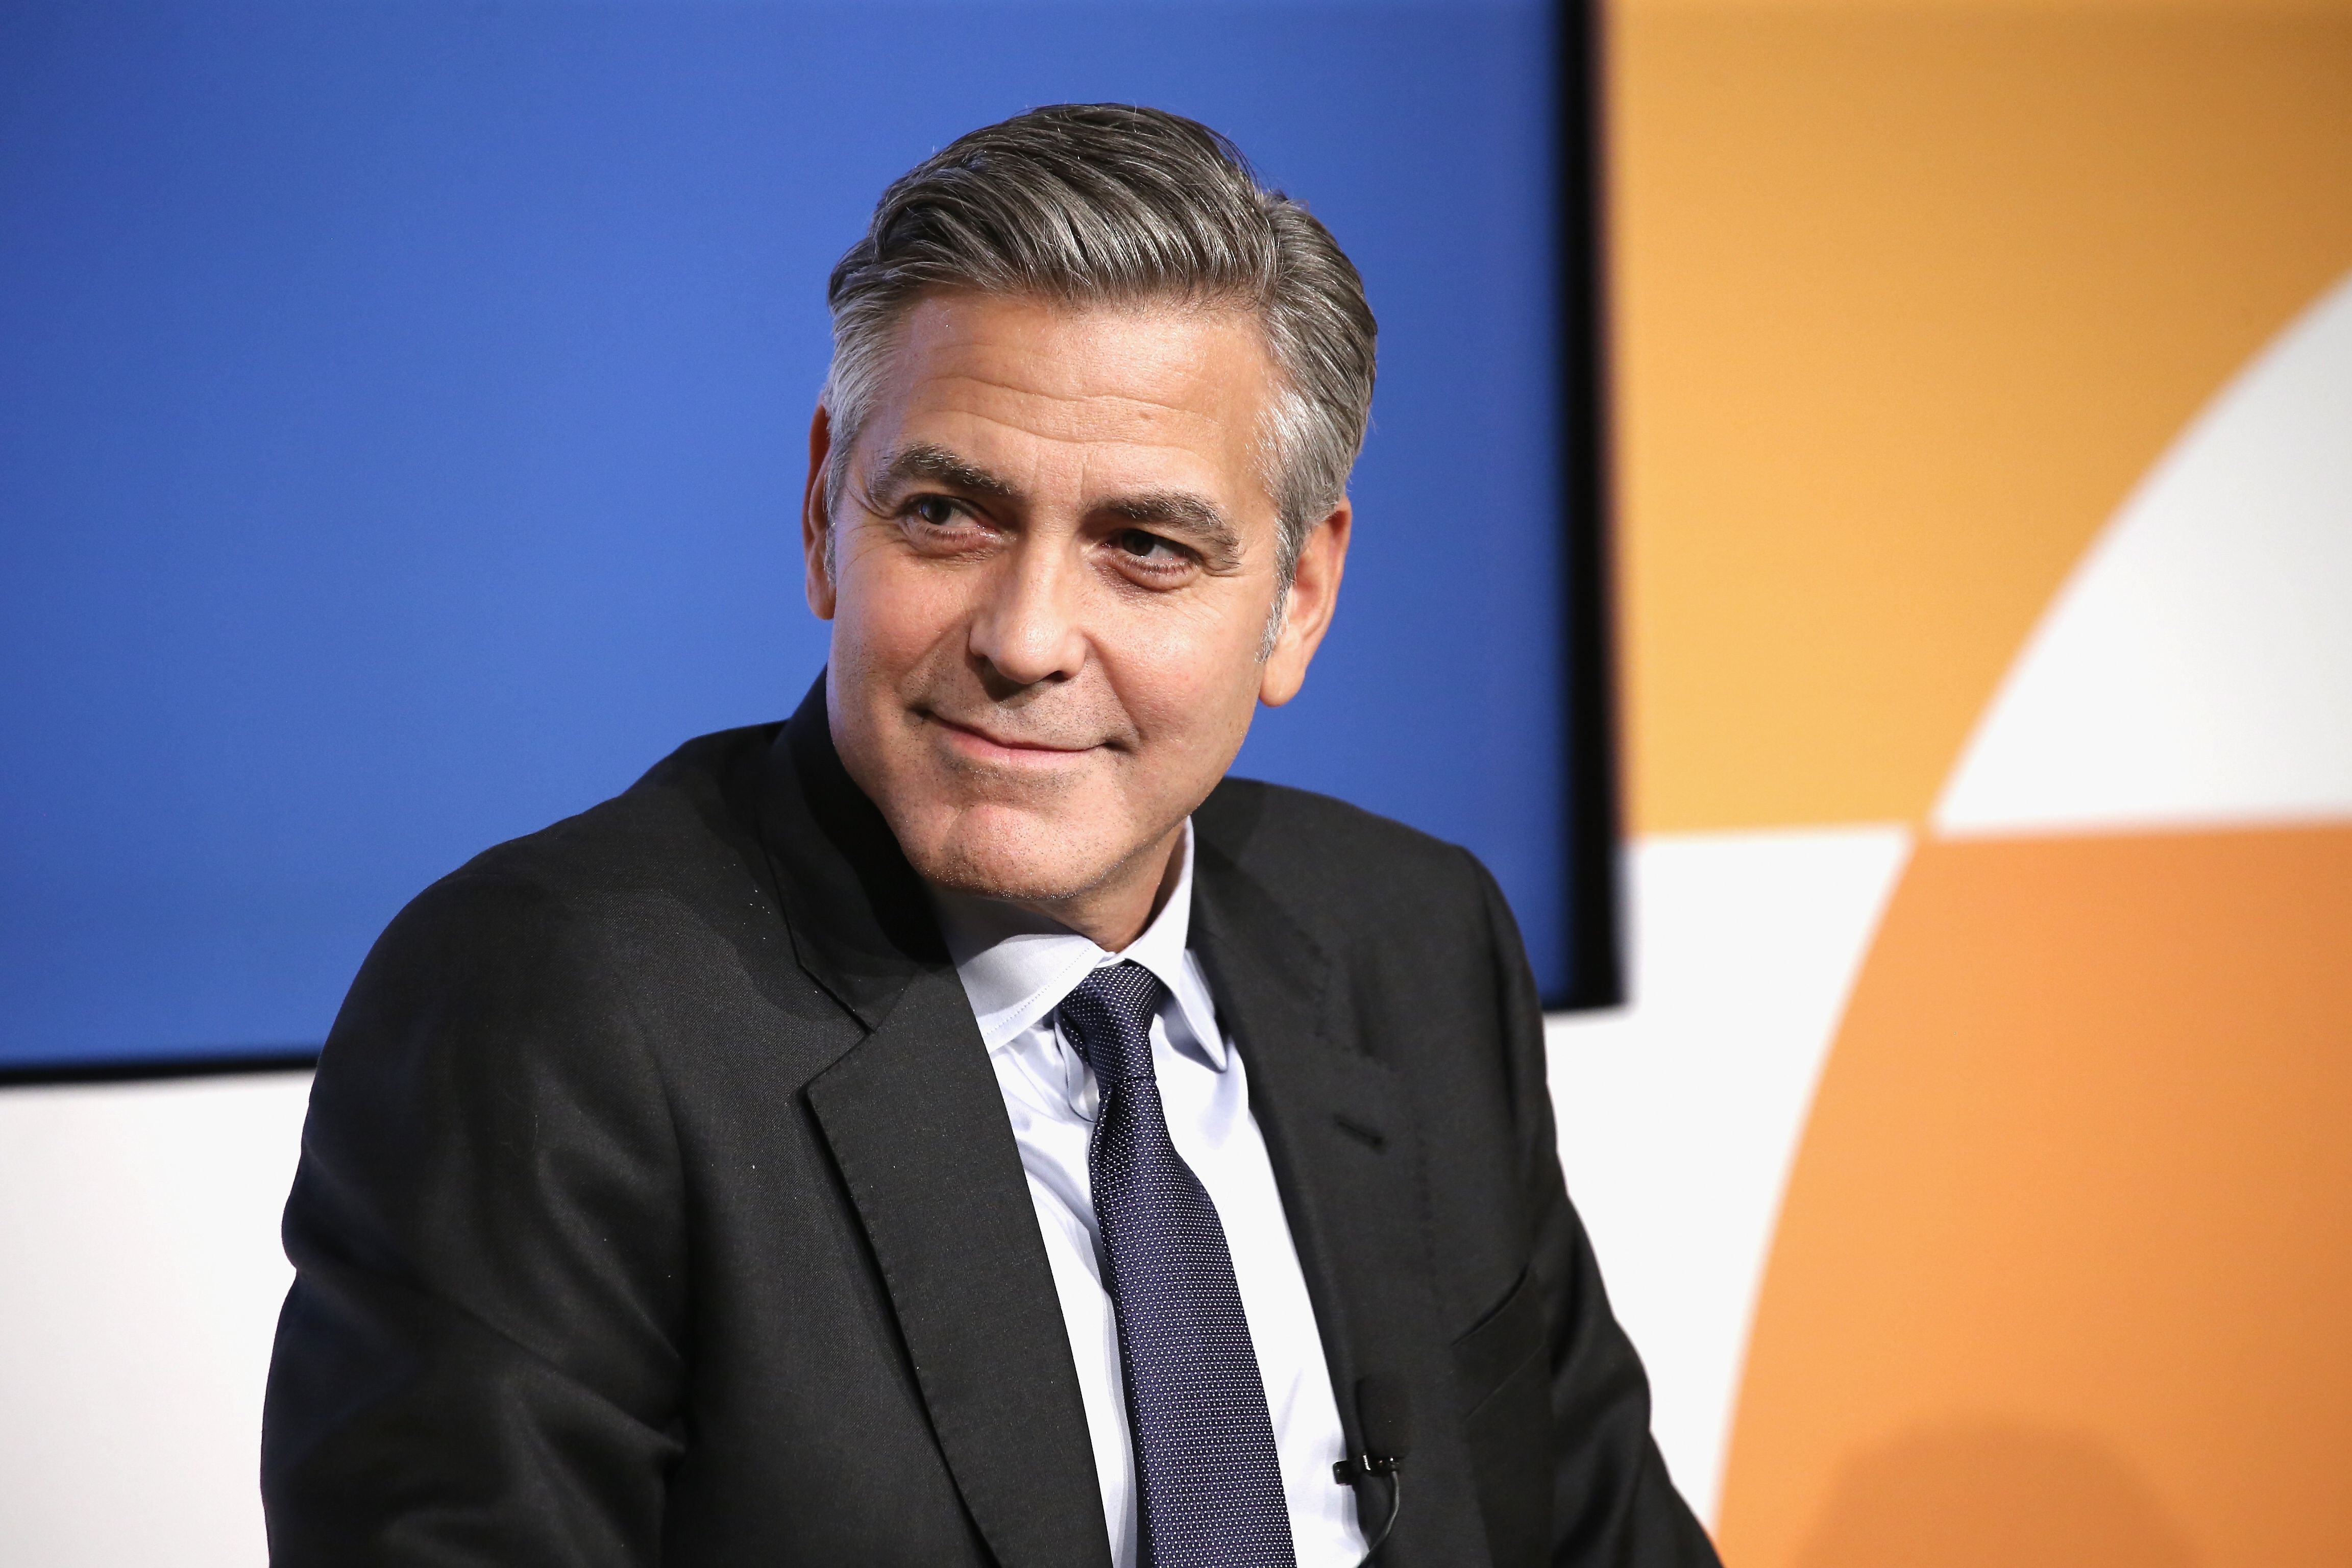 George Clooney during The 100 LIVES initiative on March 10, 2015 in New York City. | Source: Getty Images